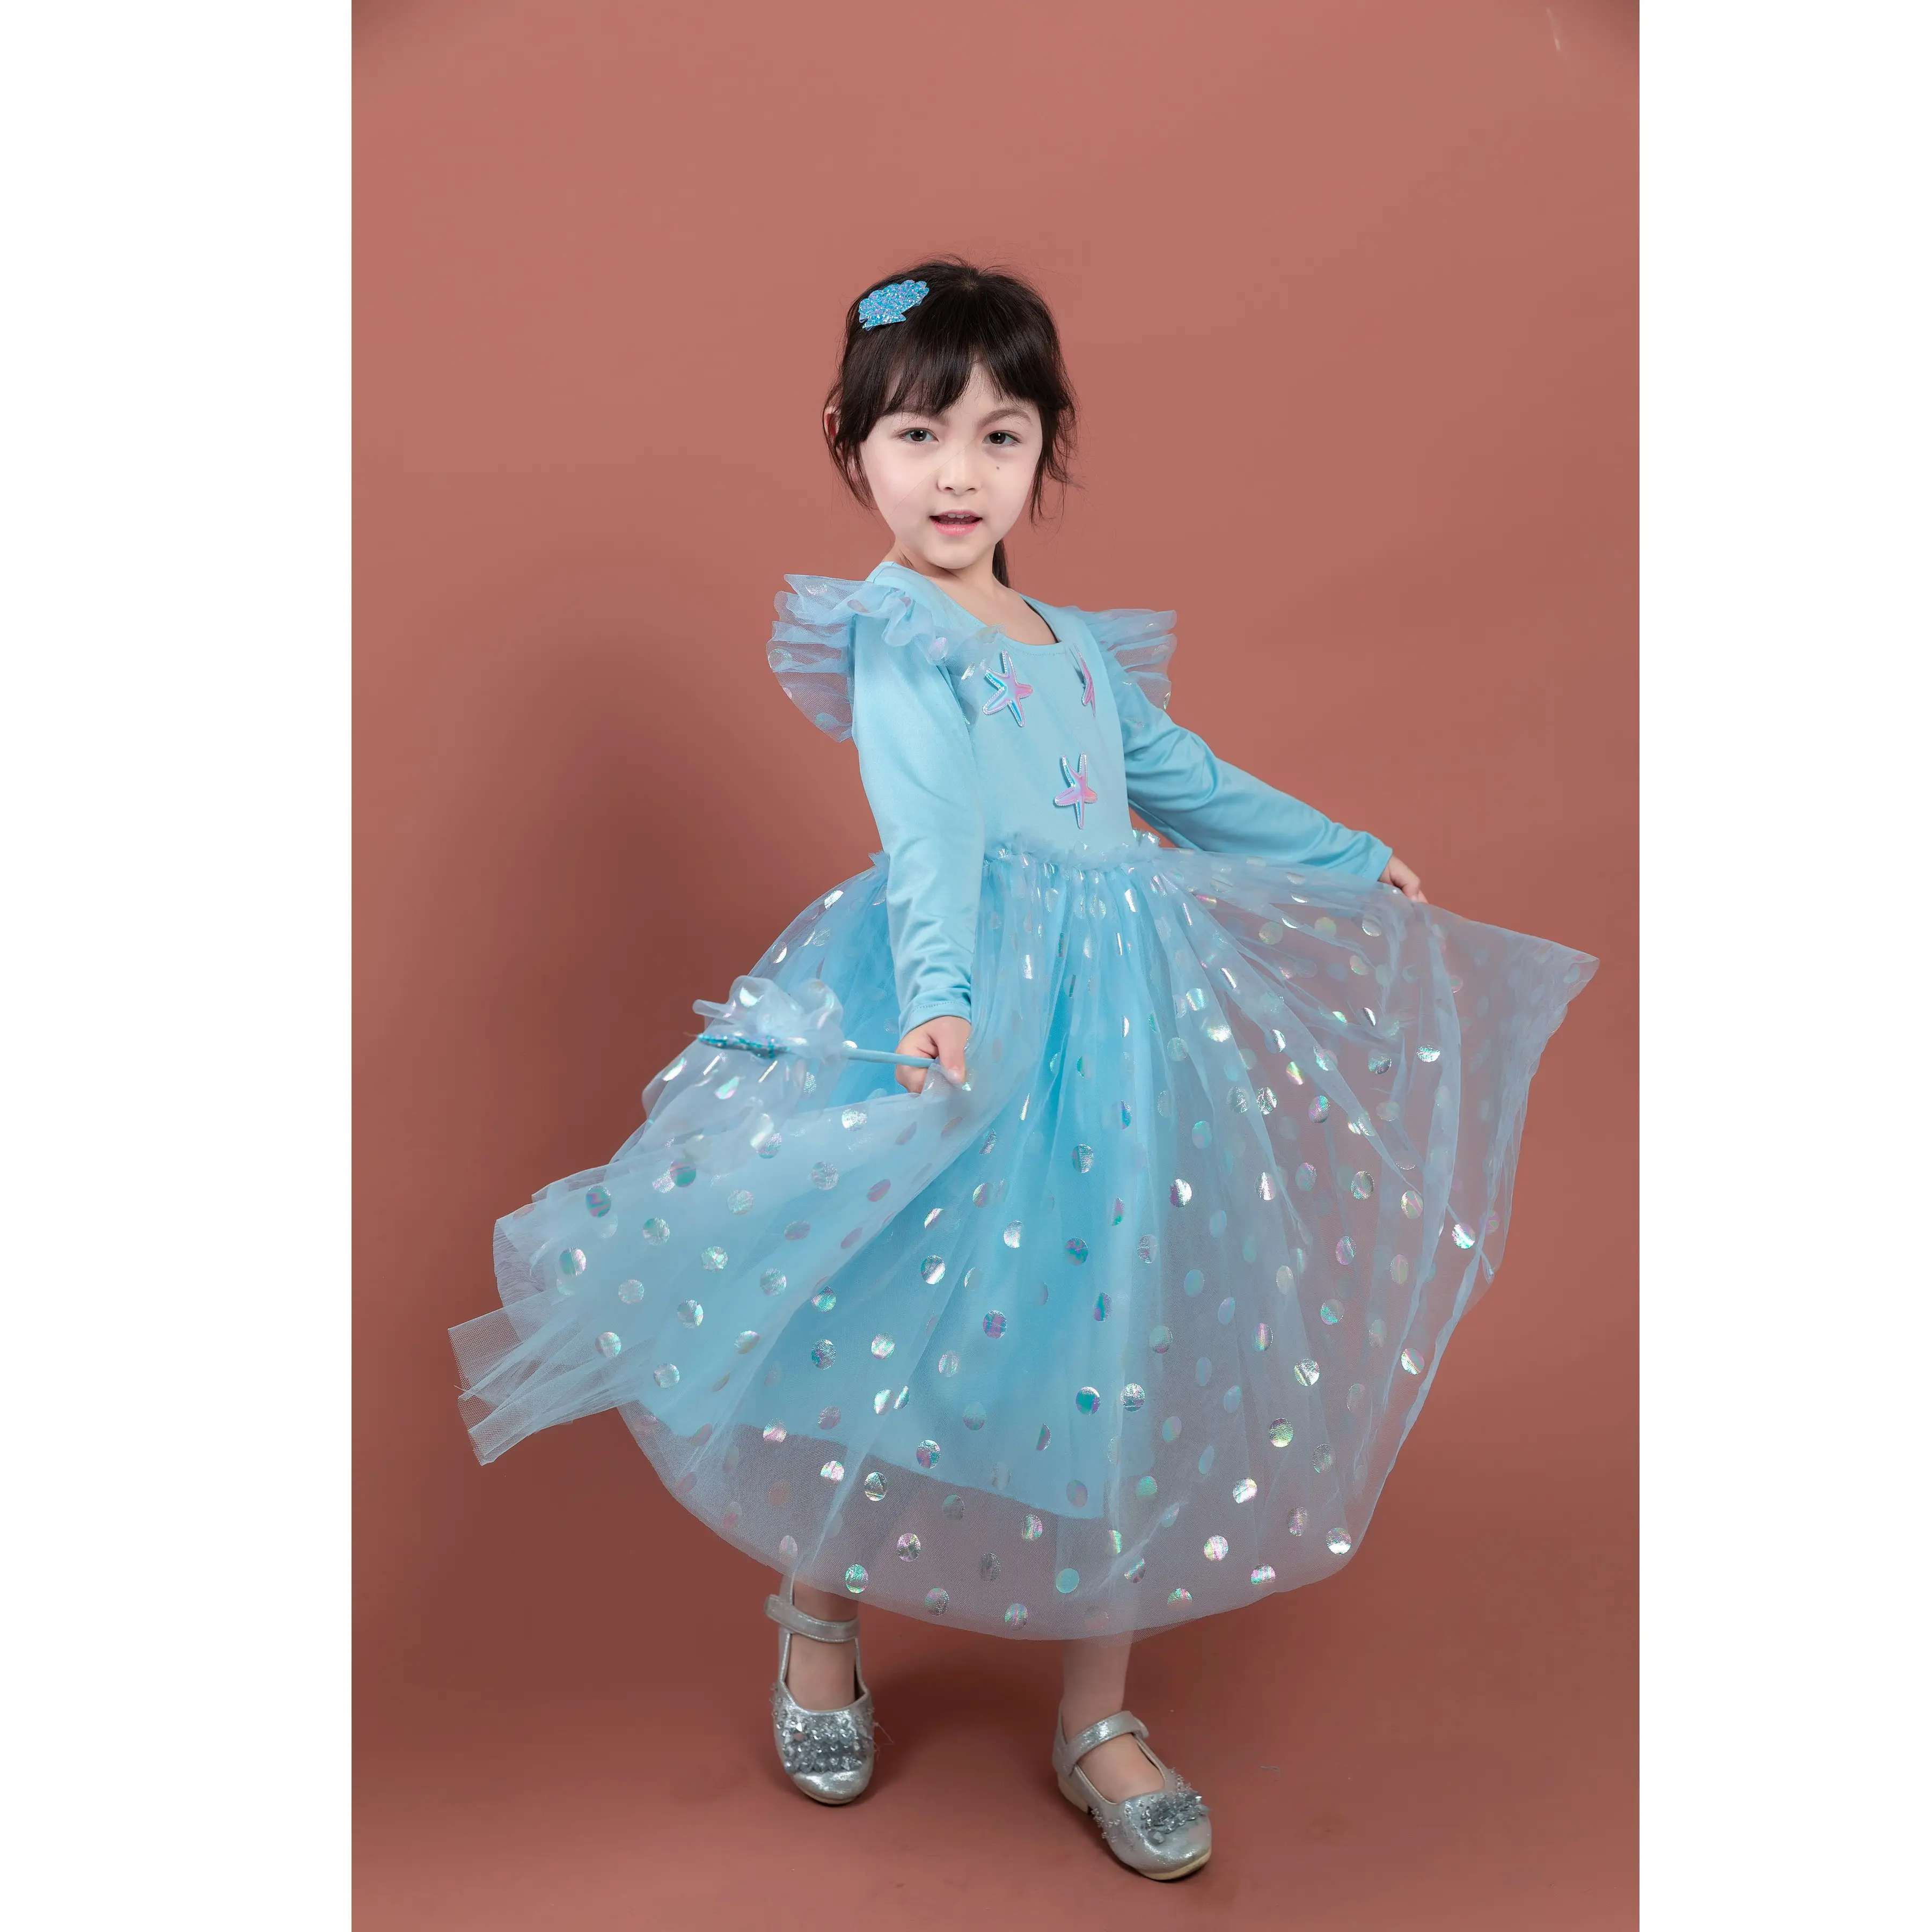 starfish and shell decoration baby girl party wear dress princess birthday party dress